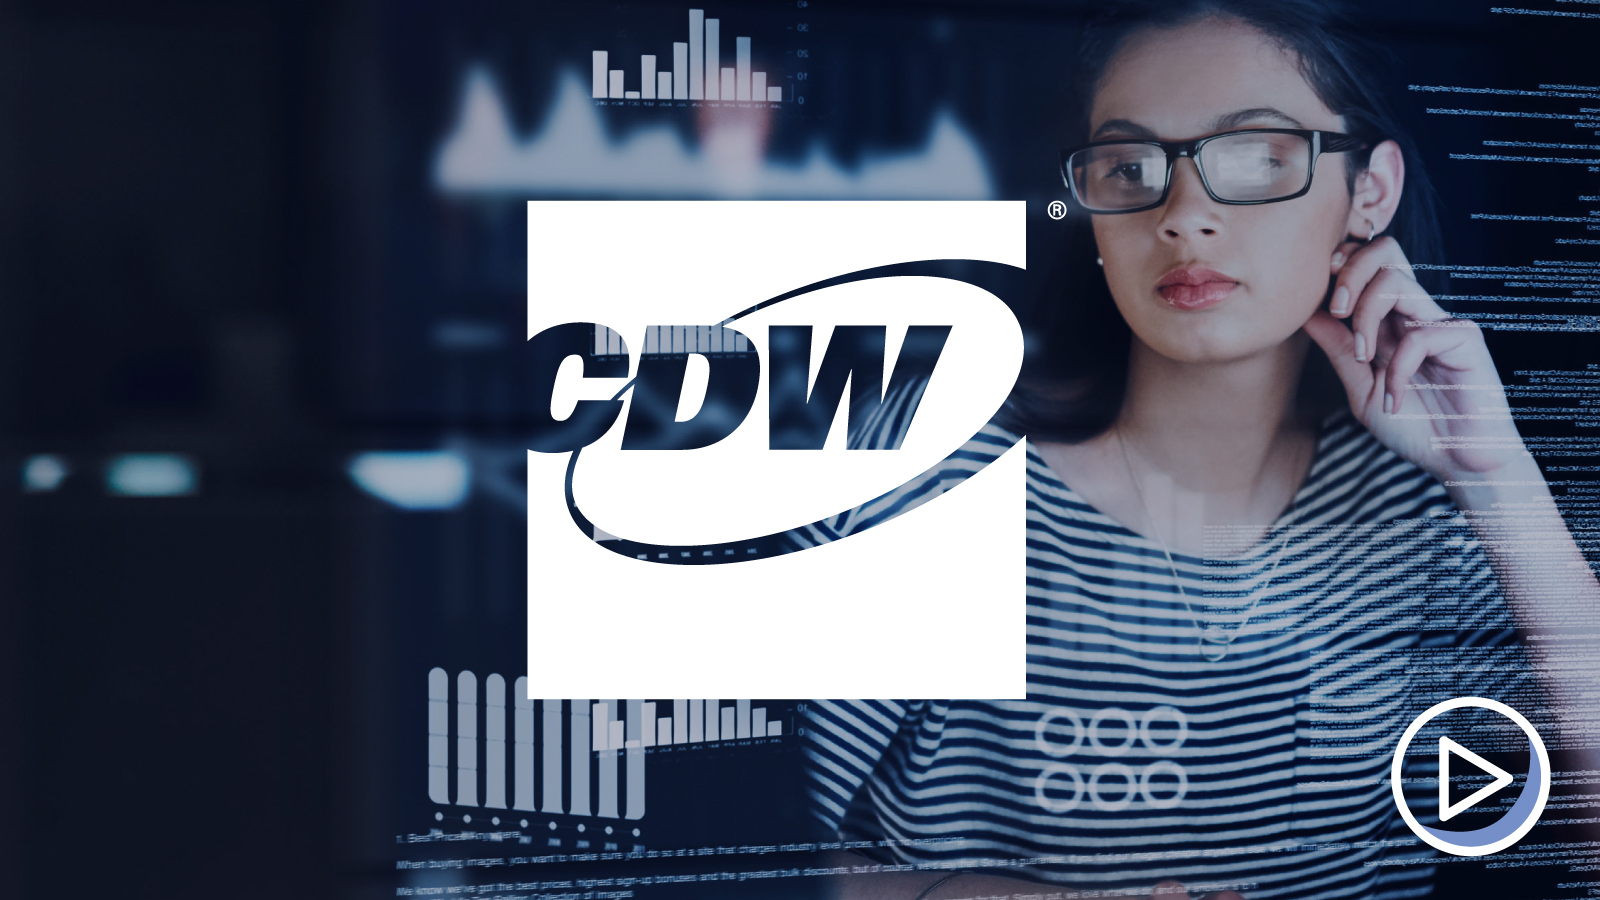 Graphic: businesswoman working with graphic overlay (CDW logo)